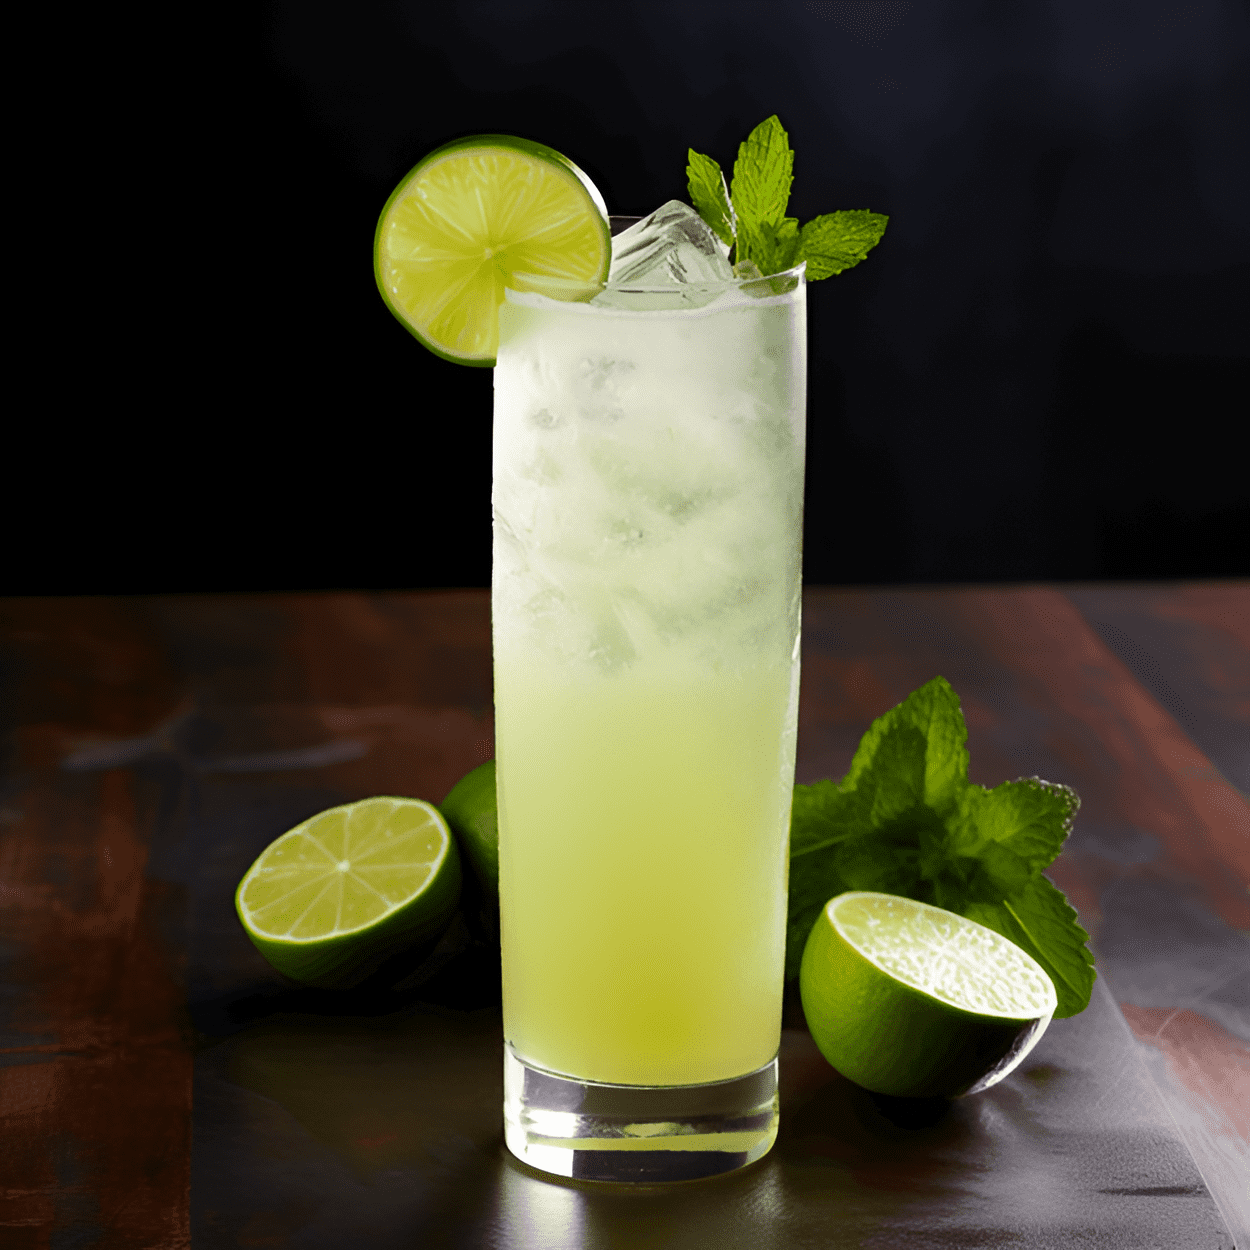 Swig Copycat Cocktail Recipe - The Swig Copycat is a delightful blend of sweet, sour, and slightly bitter flavors. The sweetness of the sugar is perfectly balanced by the sourness of the lime, while the gin adds a subtle bitter undertone.